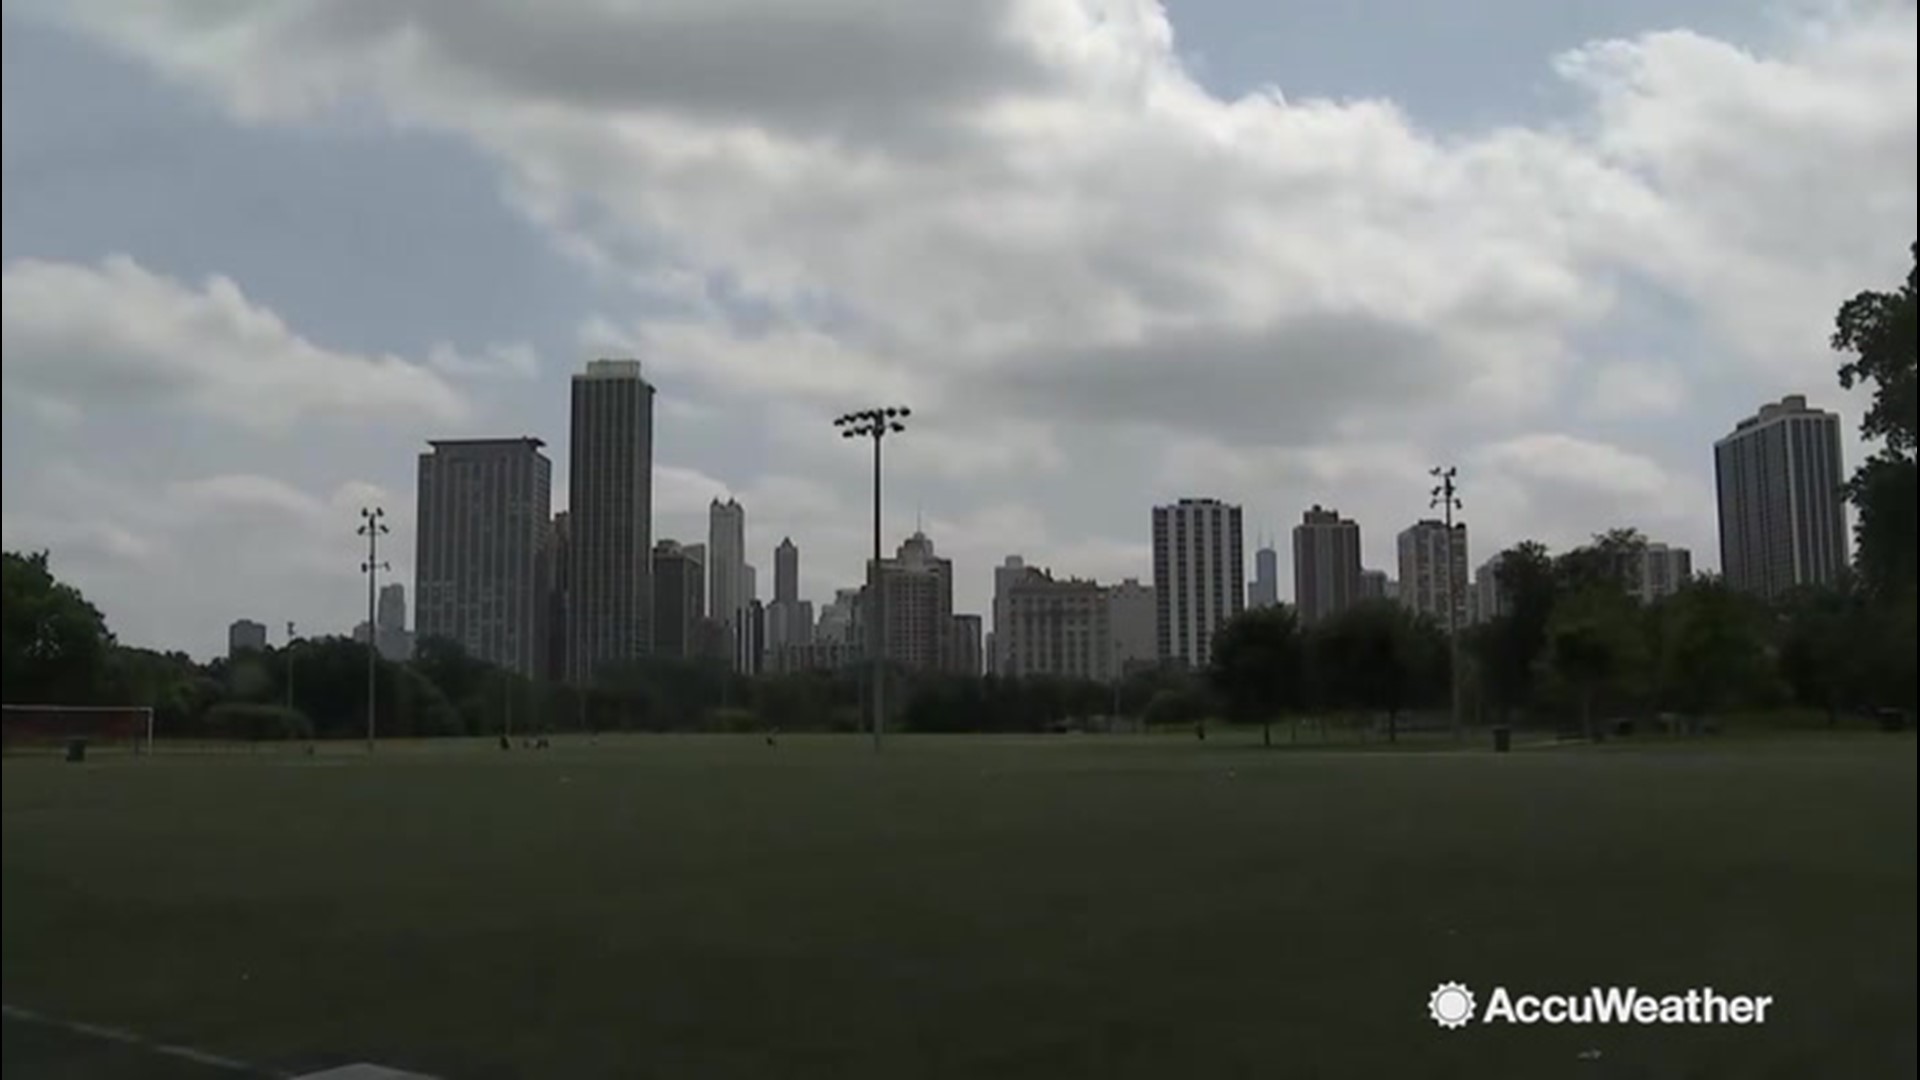 Chicago, Illinois is just one of many city's across the United States that is getting hit with a debilitating heatwave. AccuWeather's Blake Naftel has more information on how people in the 'Windy City' to talk about residents are dealing with the high temperatures.